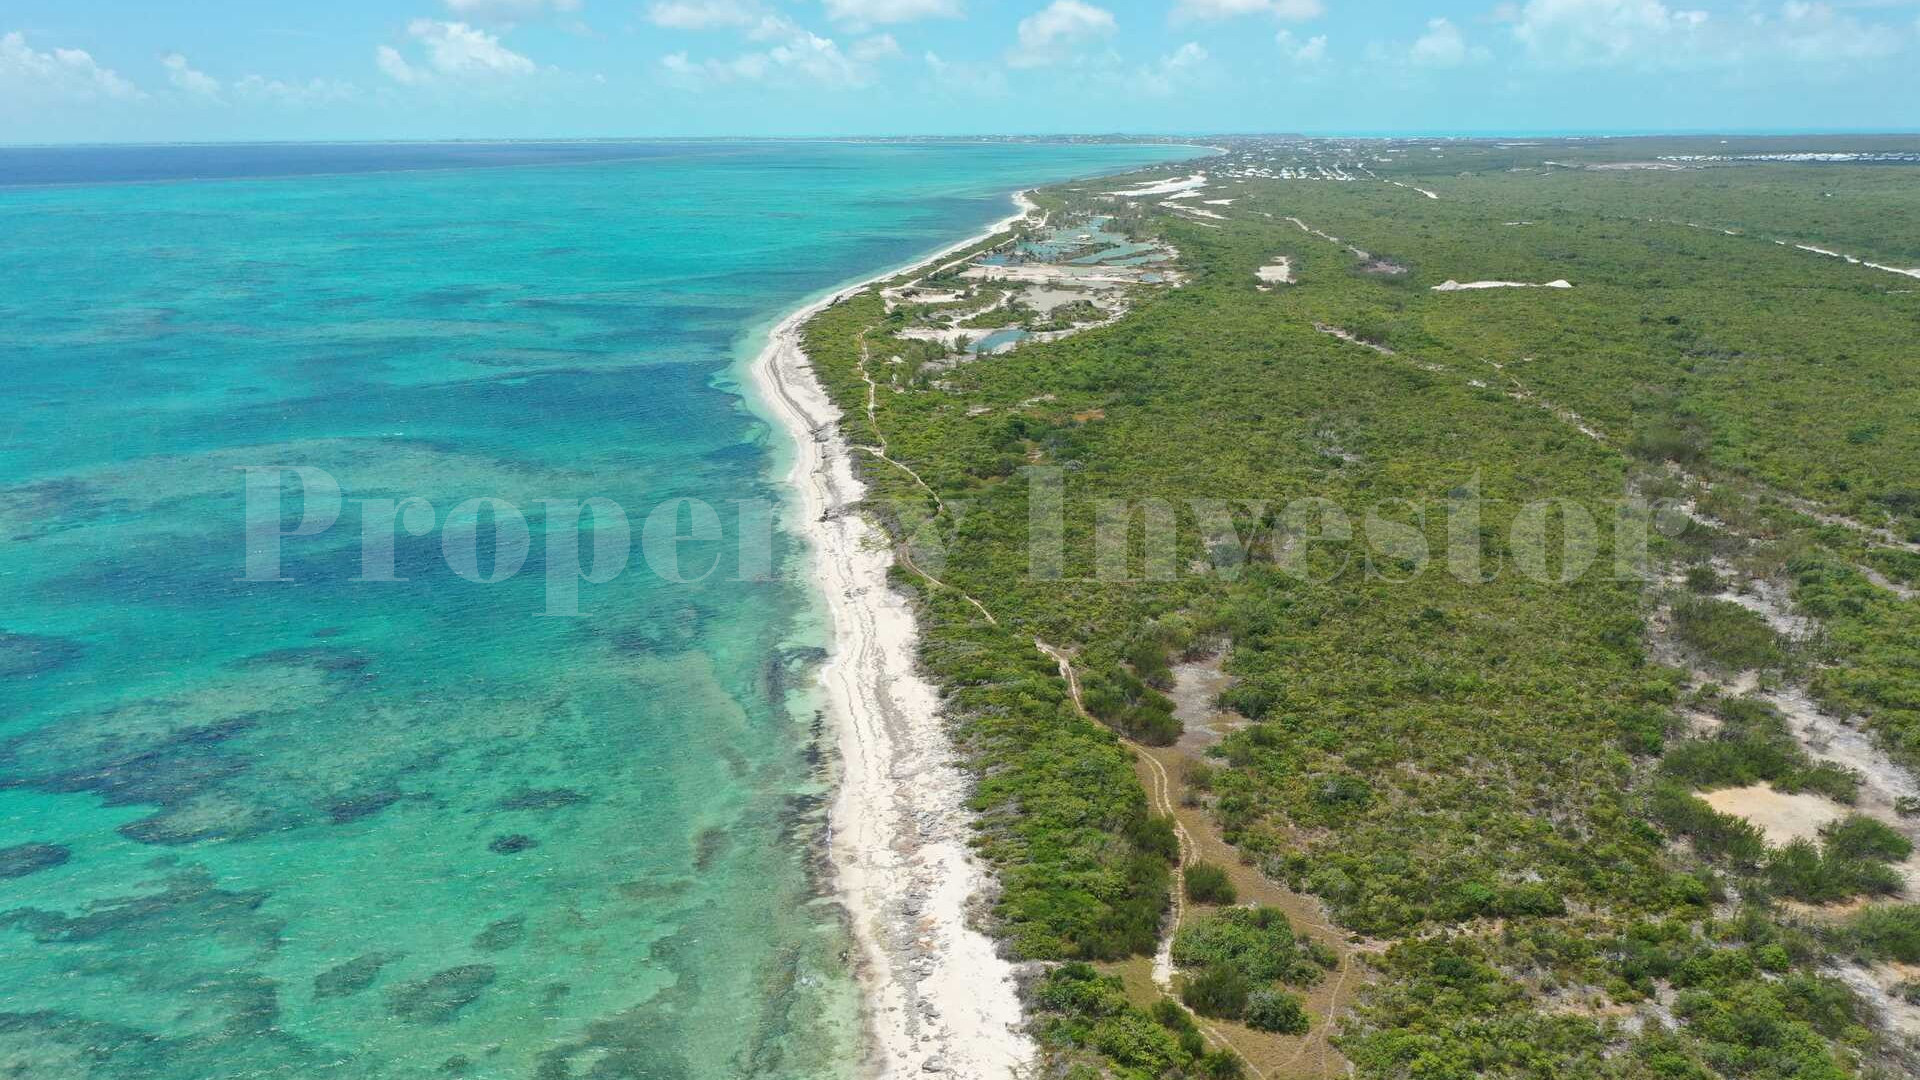 Exclusive 8 Hectare Beachfront Lot for Commercial Development in Providenciales, Turks & Caicos